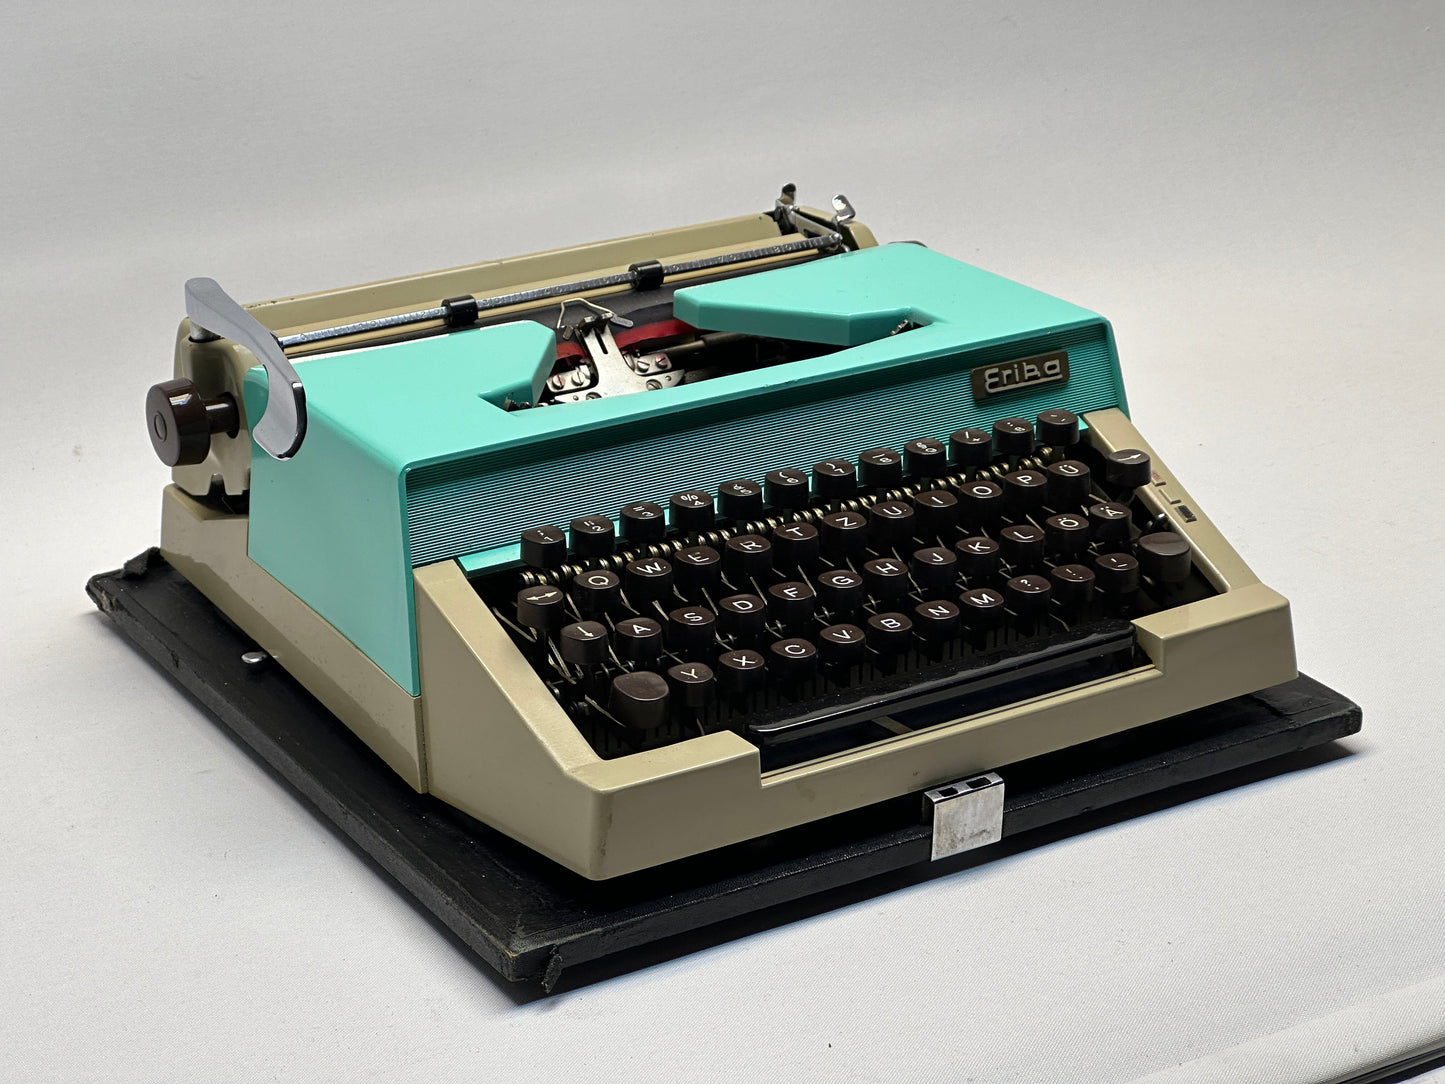 Vintage Erika Typewriter - Black Keyboard, Made in Germany, Turquoise Cover, with Wooden Carrying Case